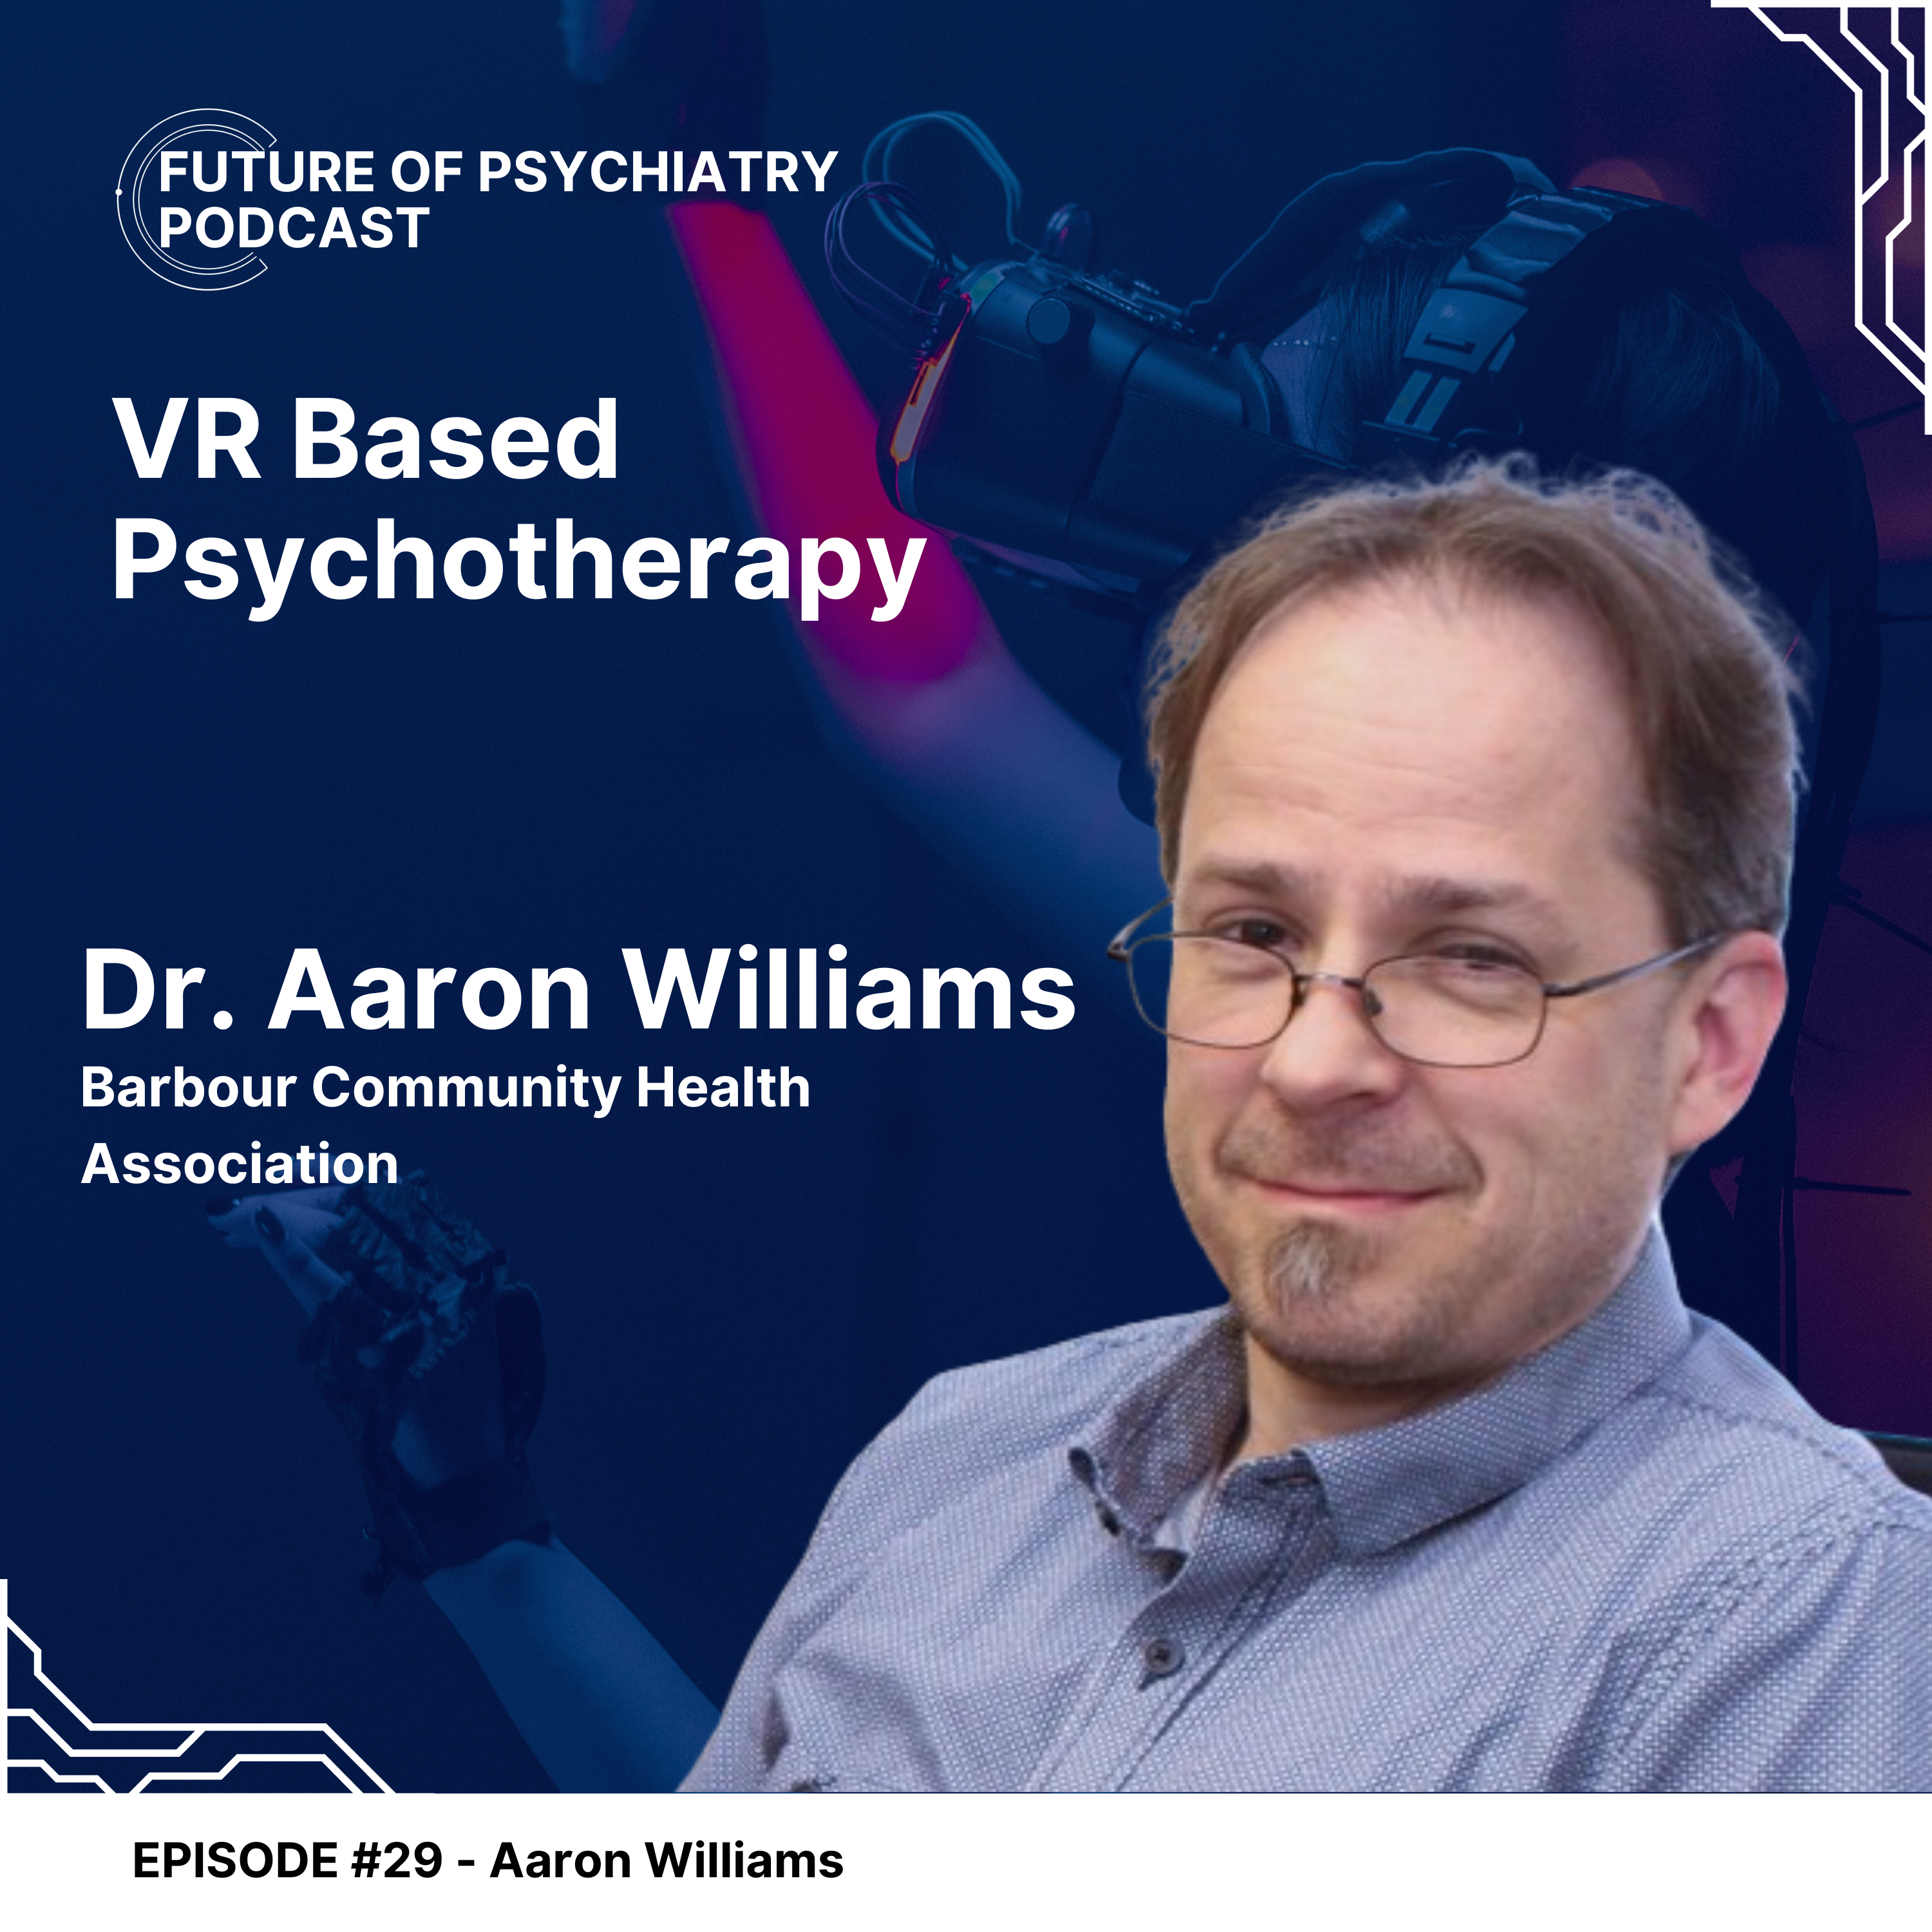 VR Based Psychotherapy with Dr. Aaron Williams